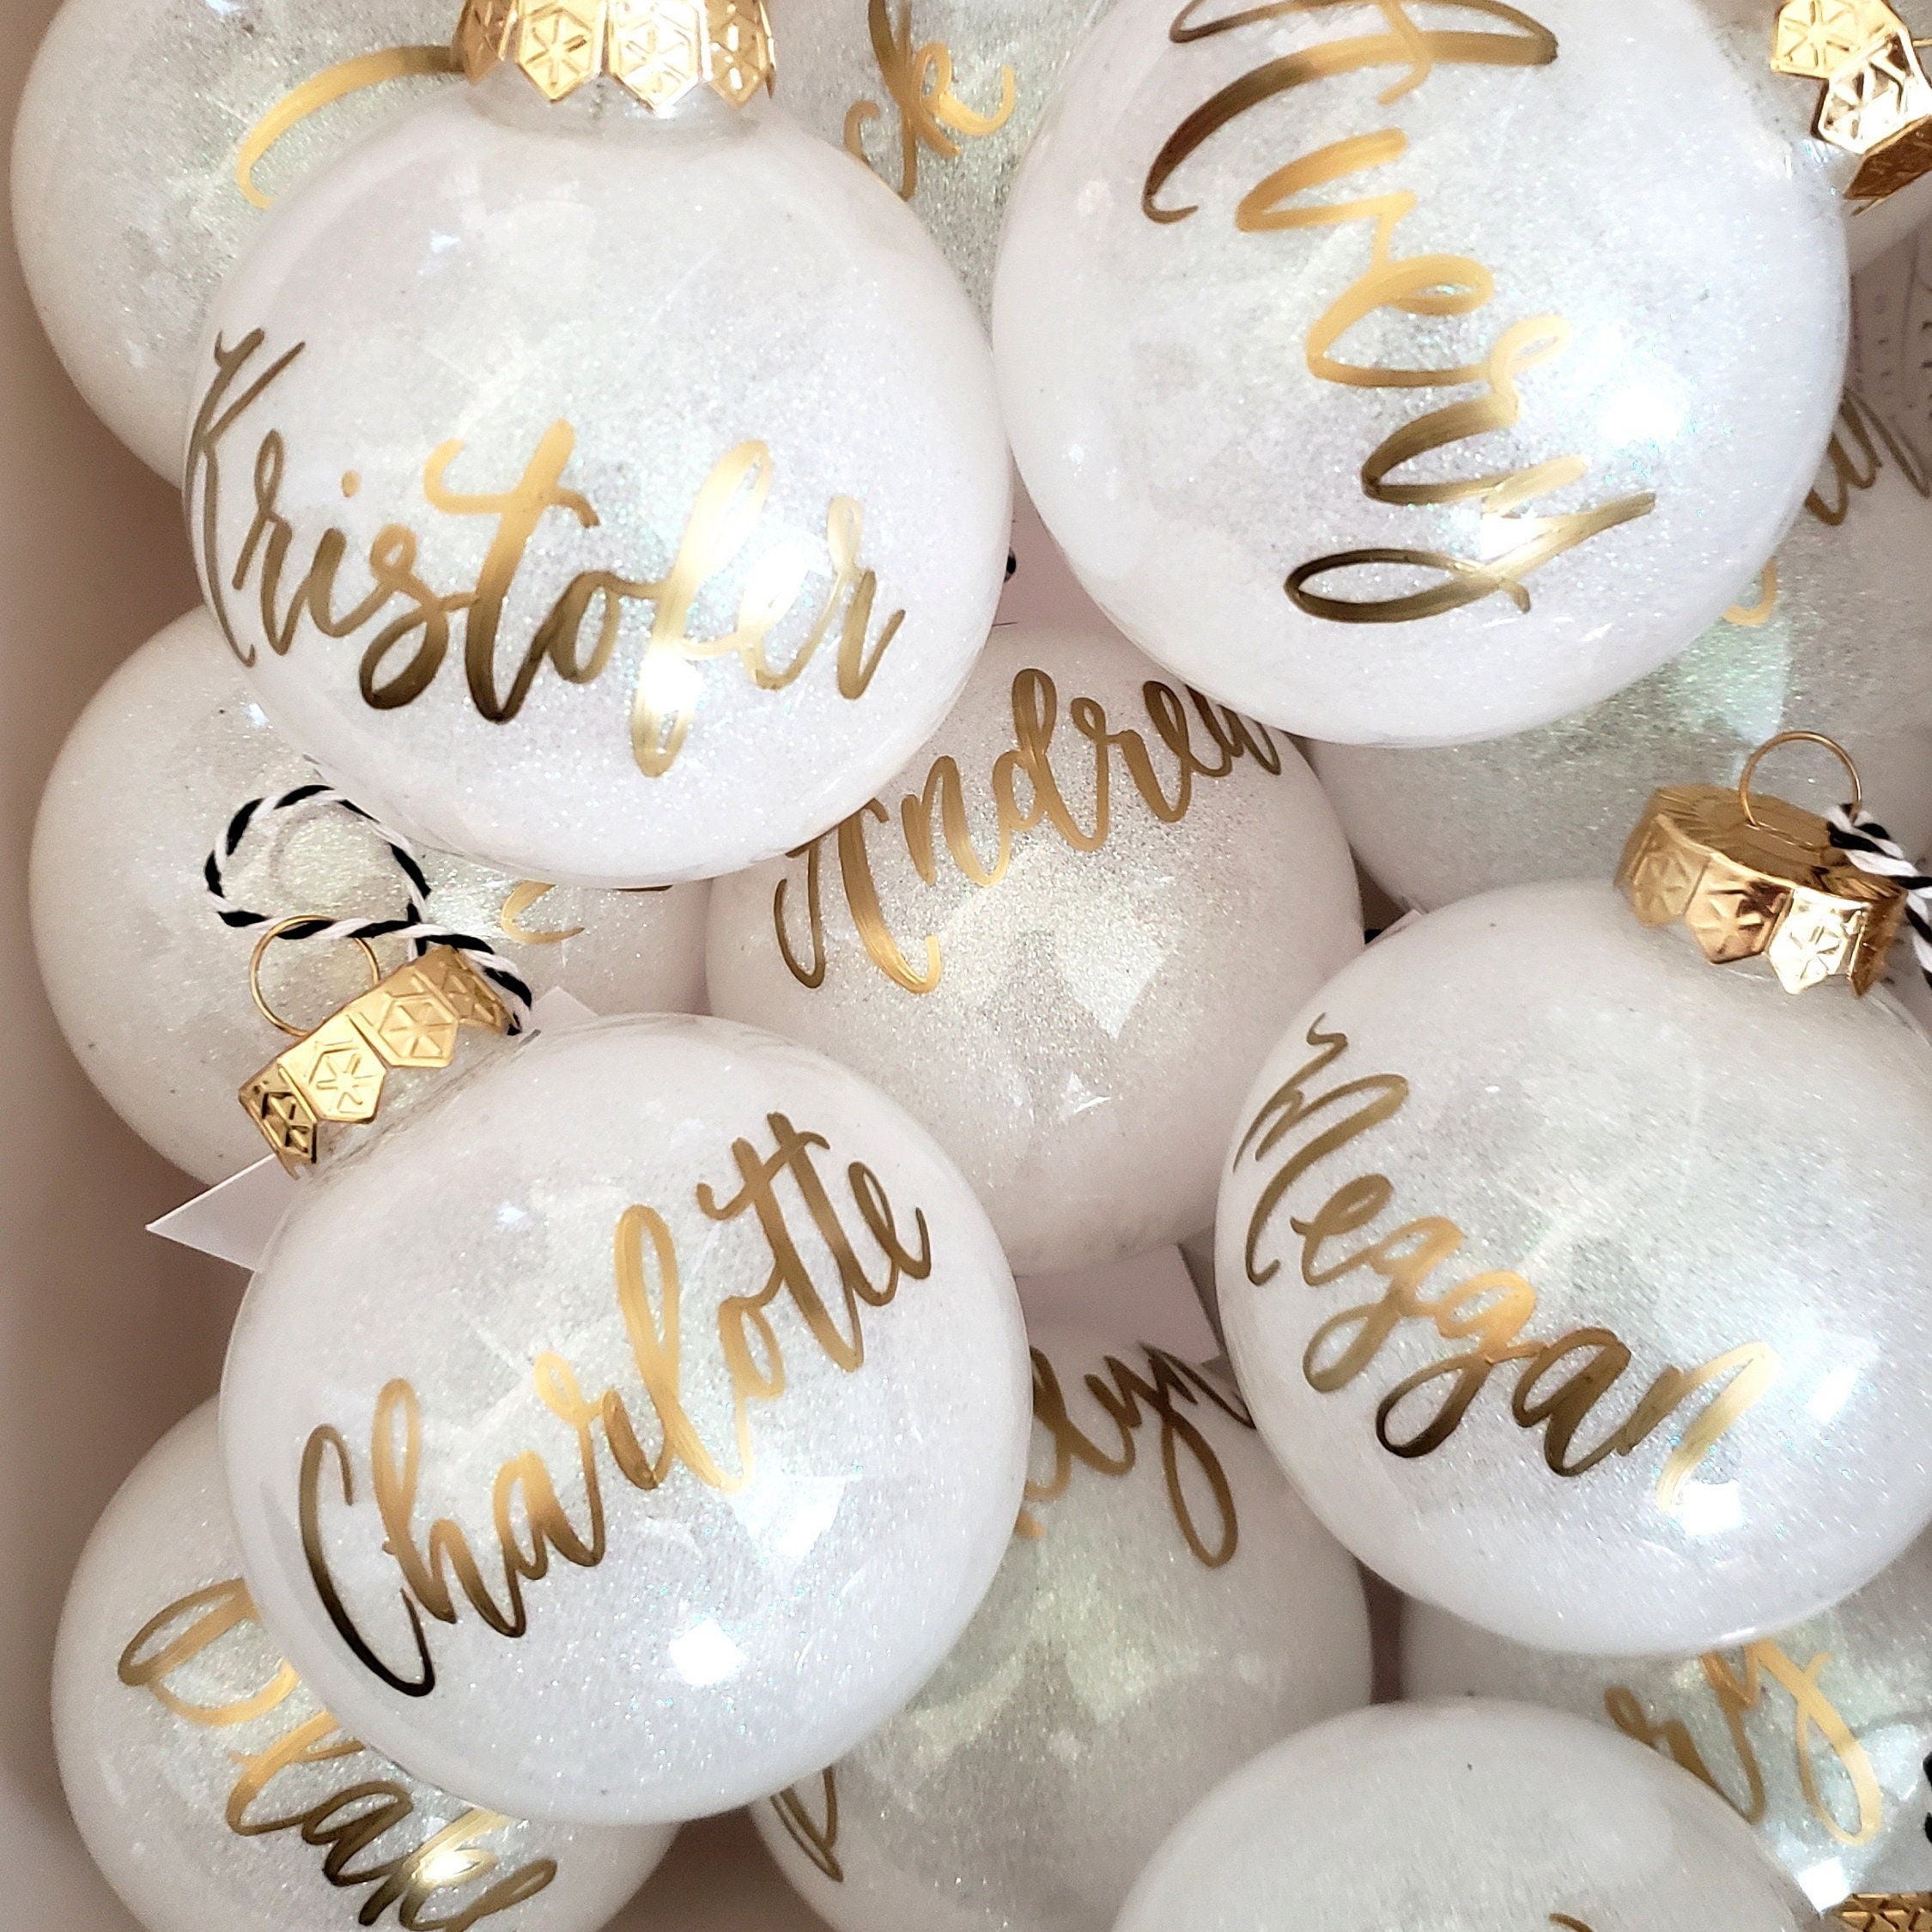 Personalized Name Christmas Ornament, White Glitter Ornament With